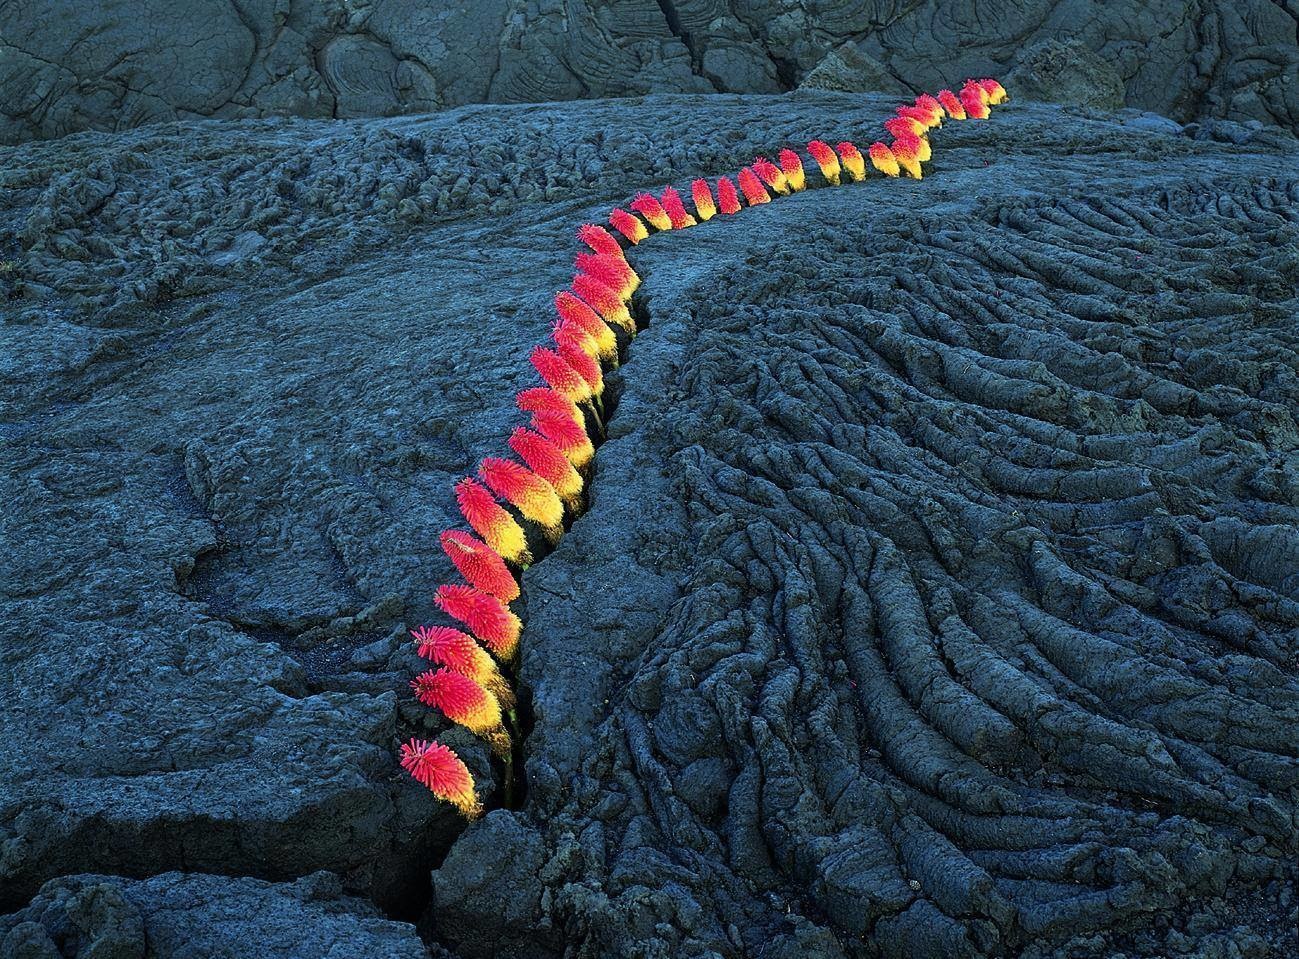 Can you believe that this is a flower, called a red hot poker or torch lily, sprouting through a crack in the lava? What a perfect match!